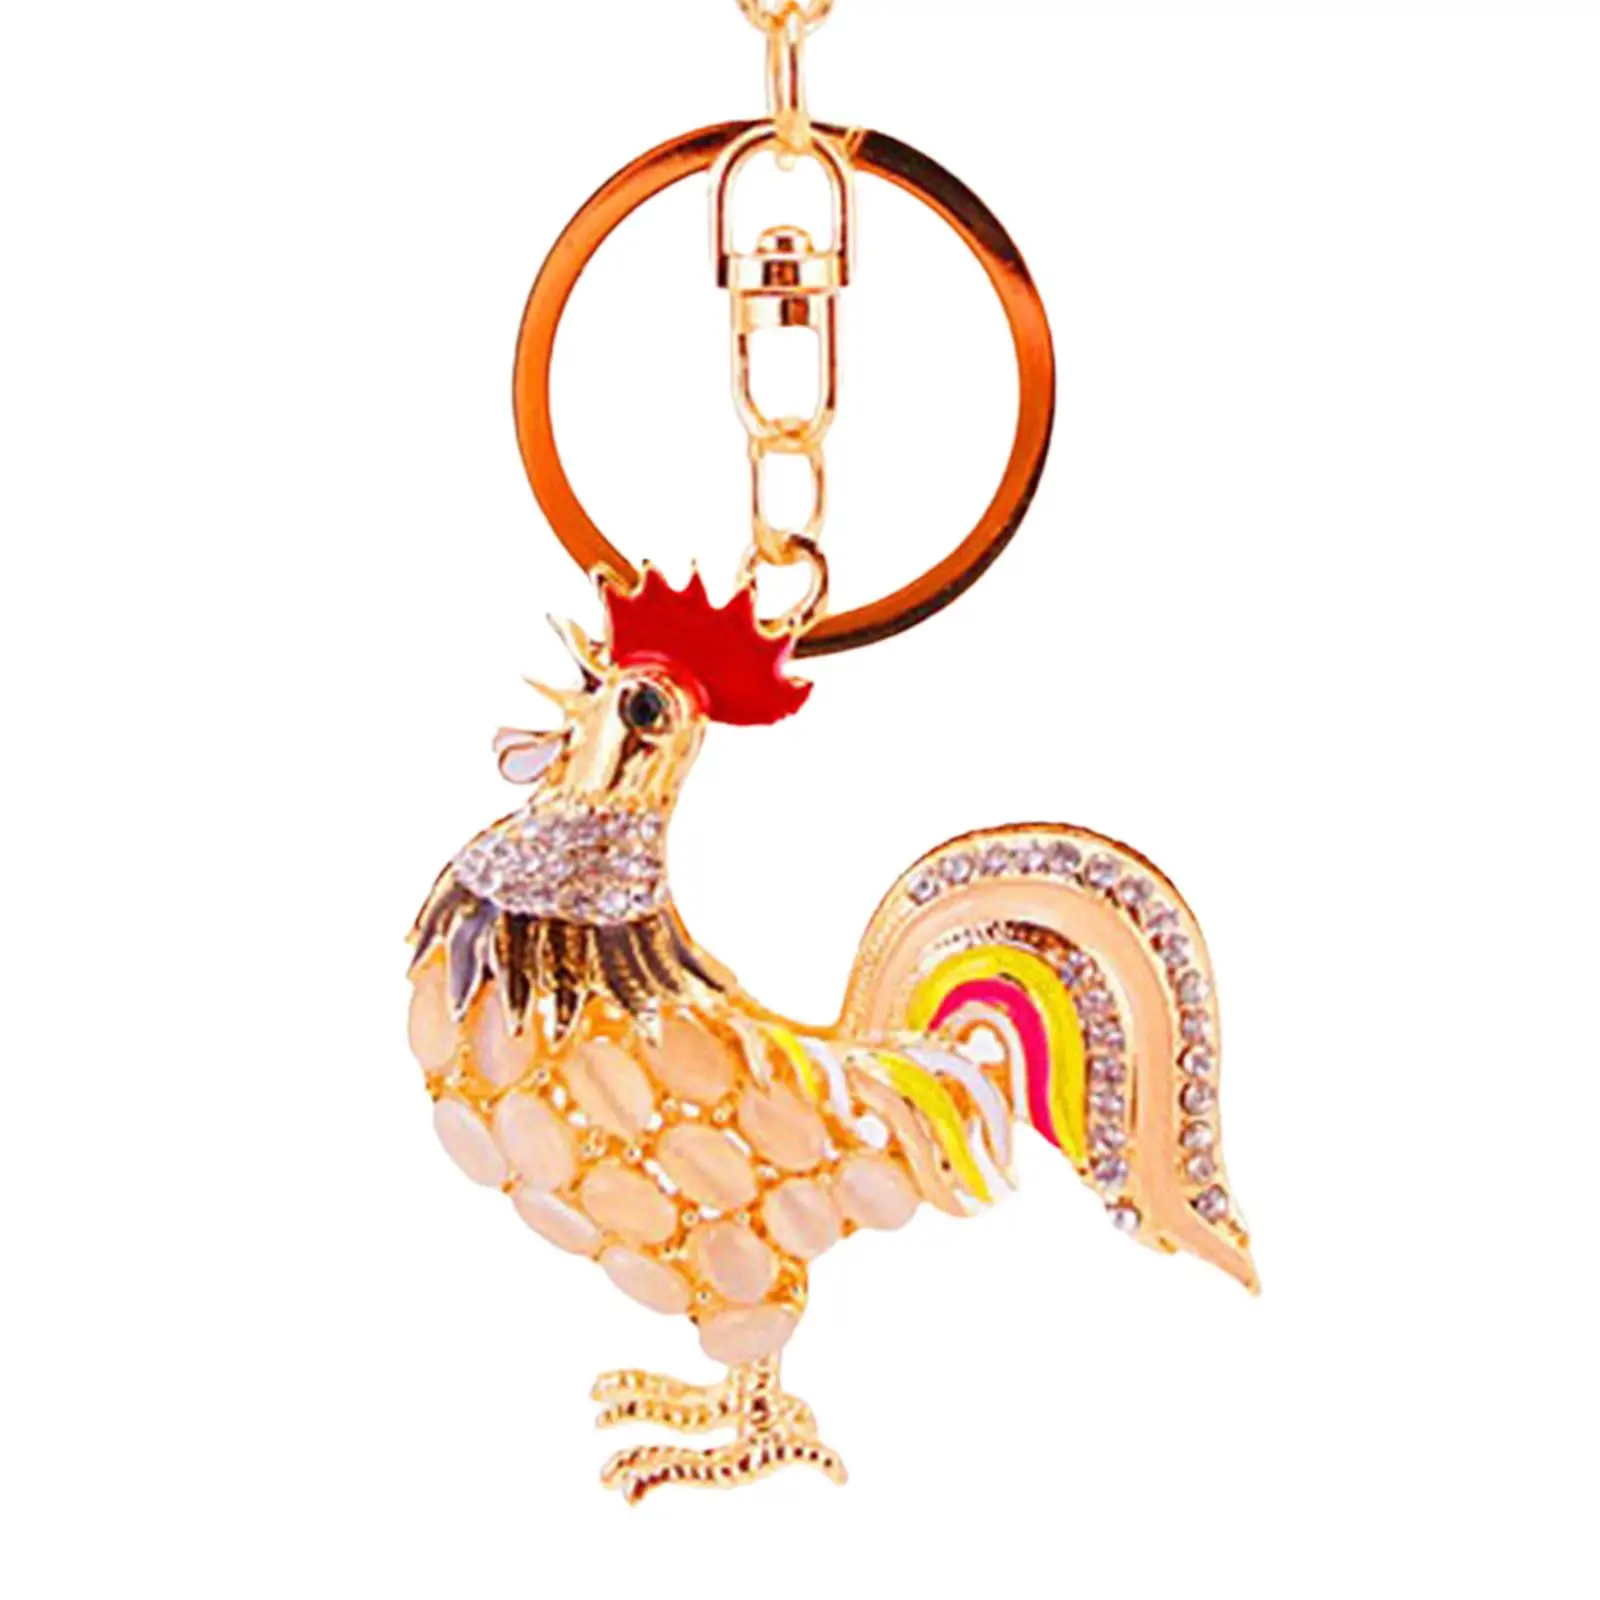 Rooster Bling Keychains Stylish with Clasp Jewelry Accessory Backpack Charms Sparkling Charm Rhinestone Keychain for Women Girls